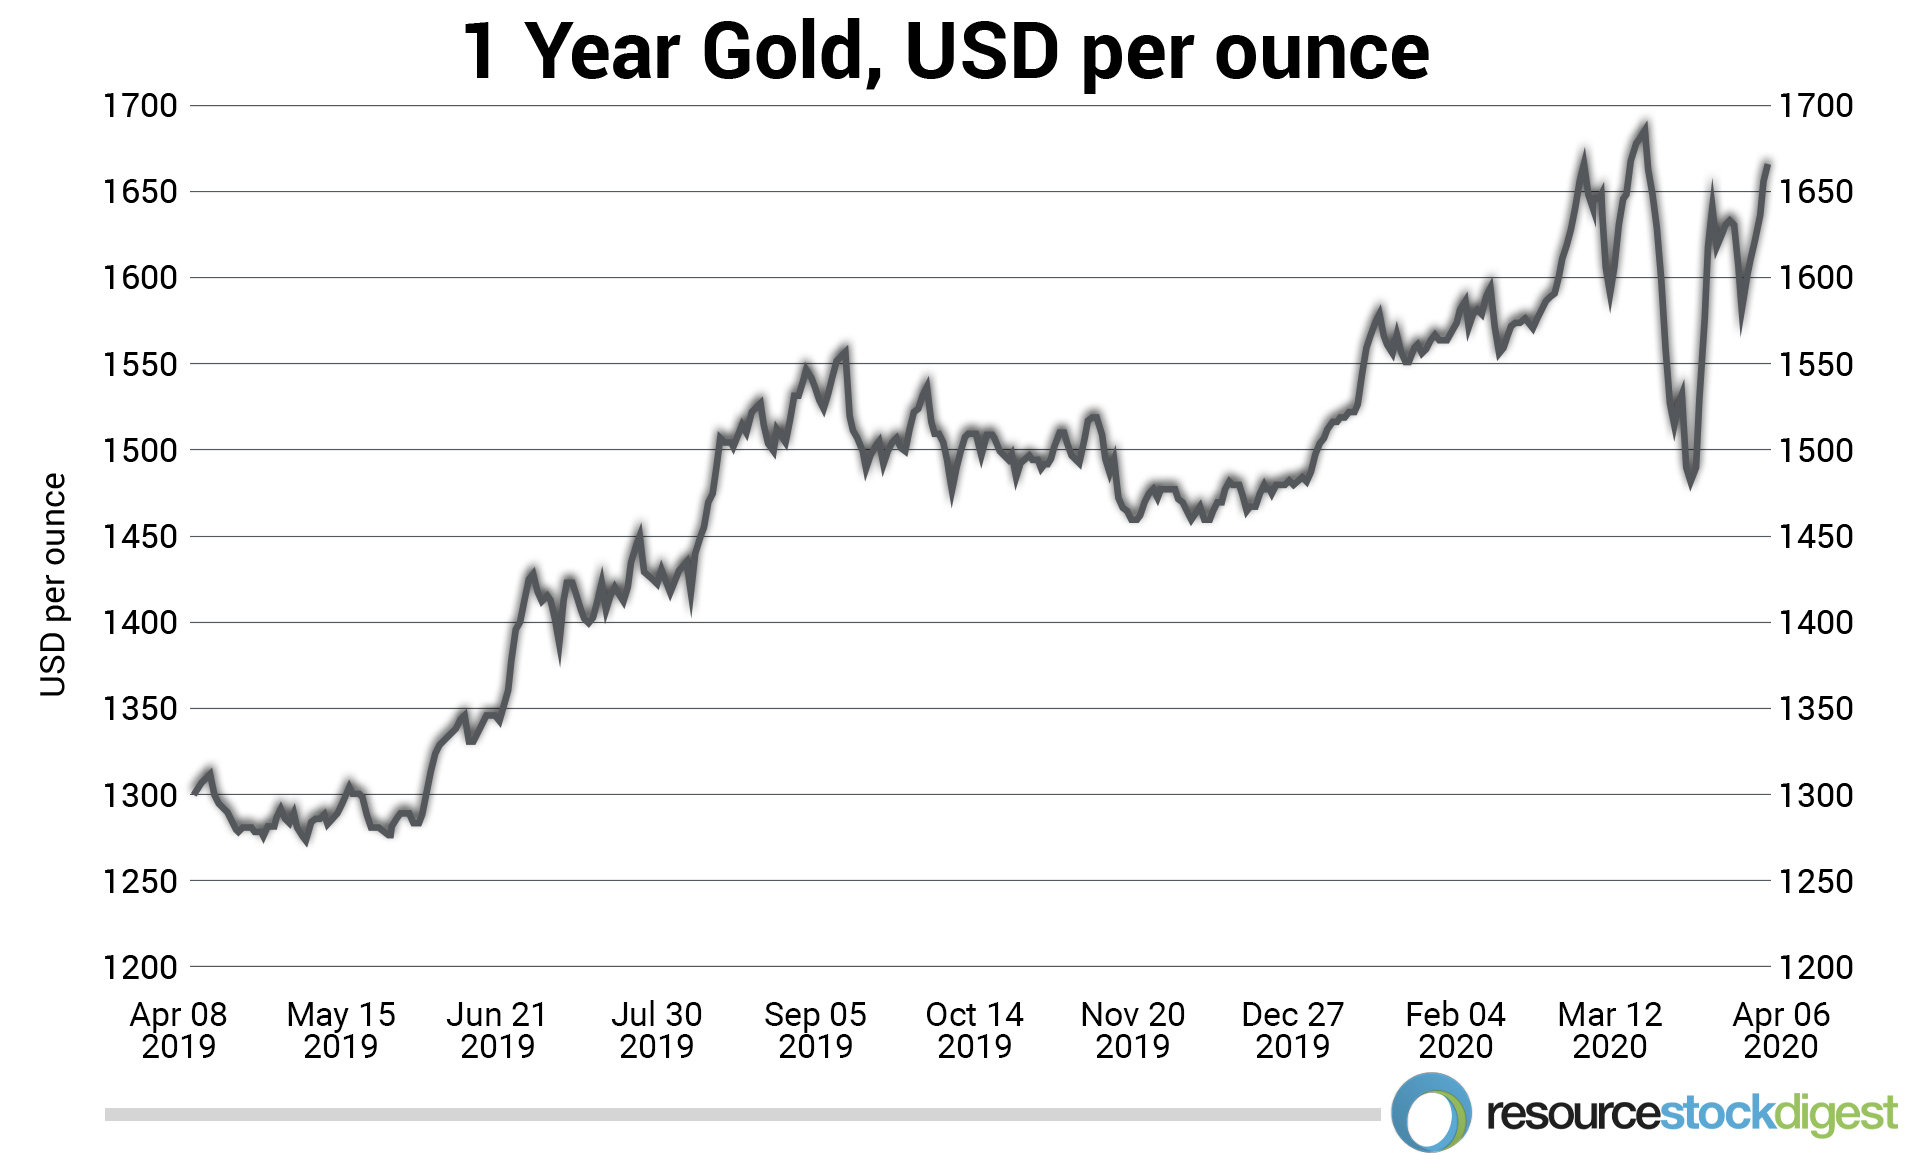 1year-gold-usd-per-ounce